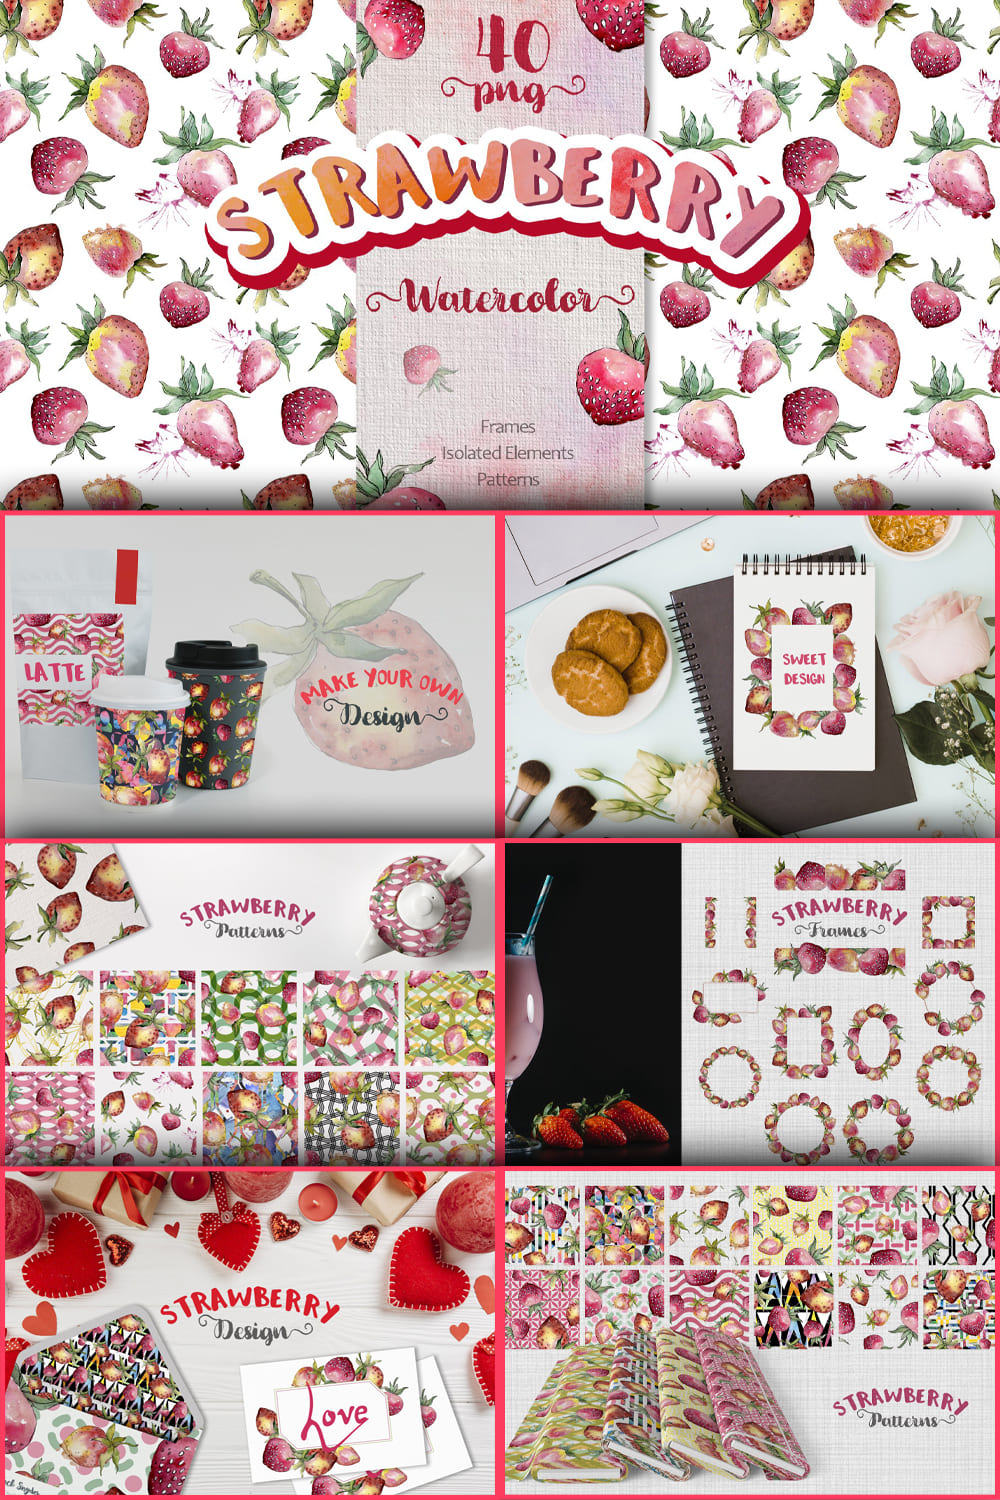 224327 strawberry watercolor png pinterest 1000 1500 507